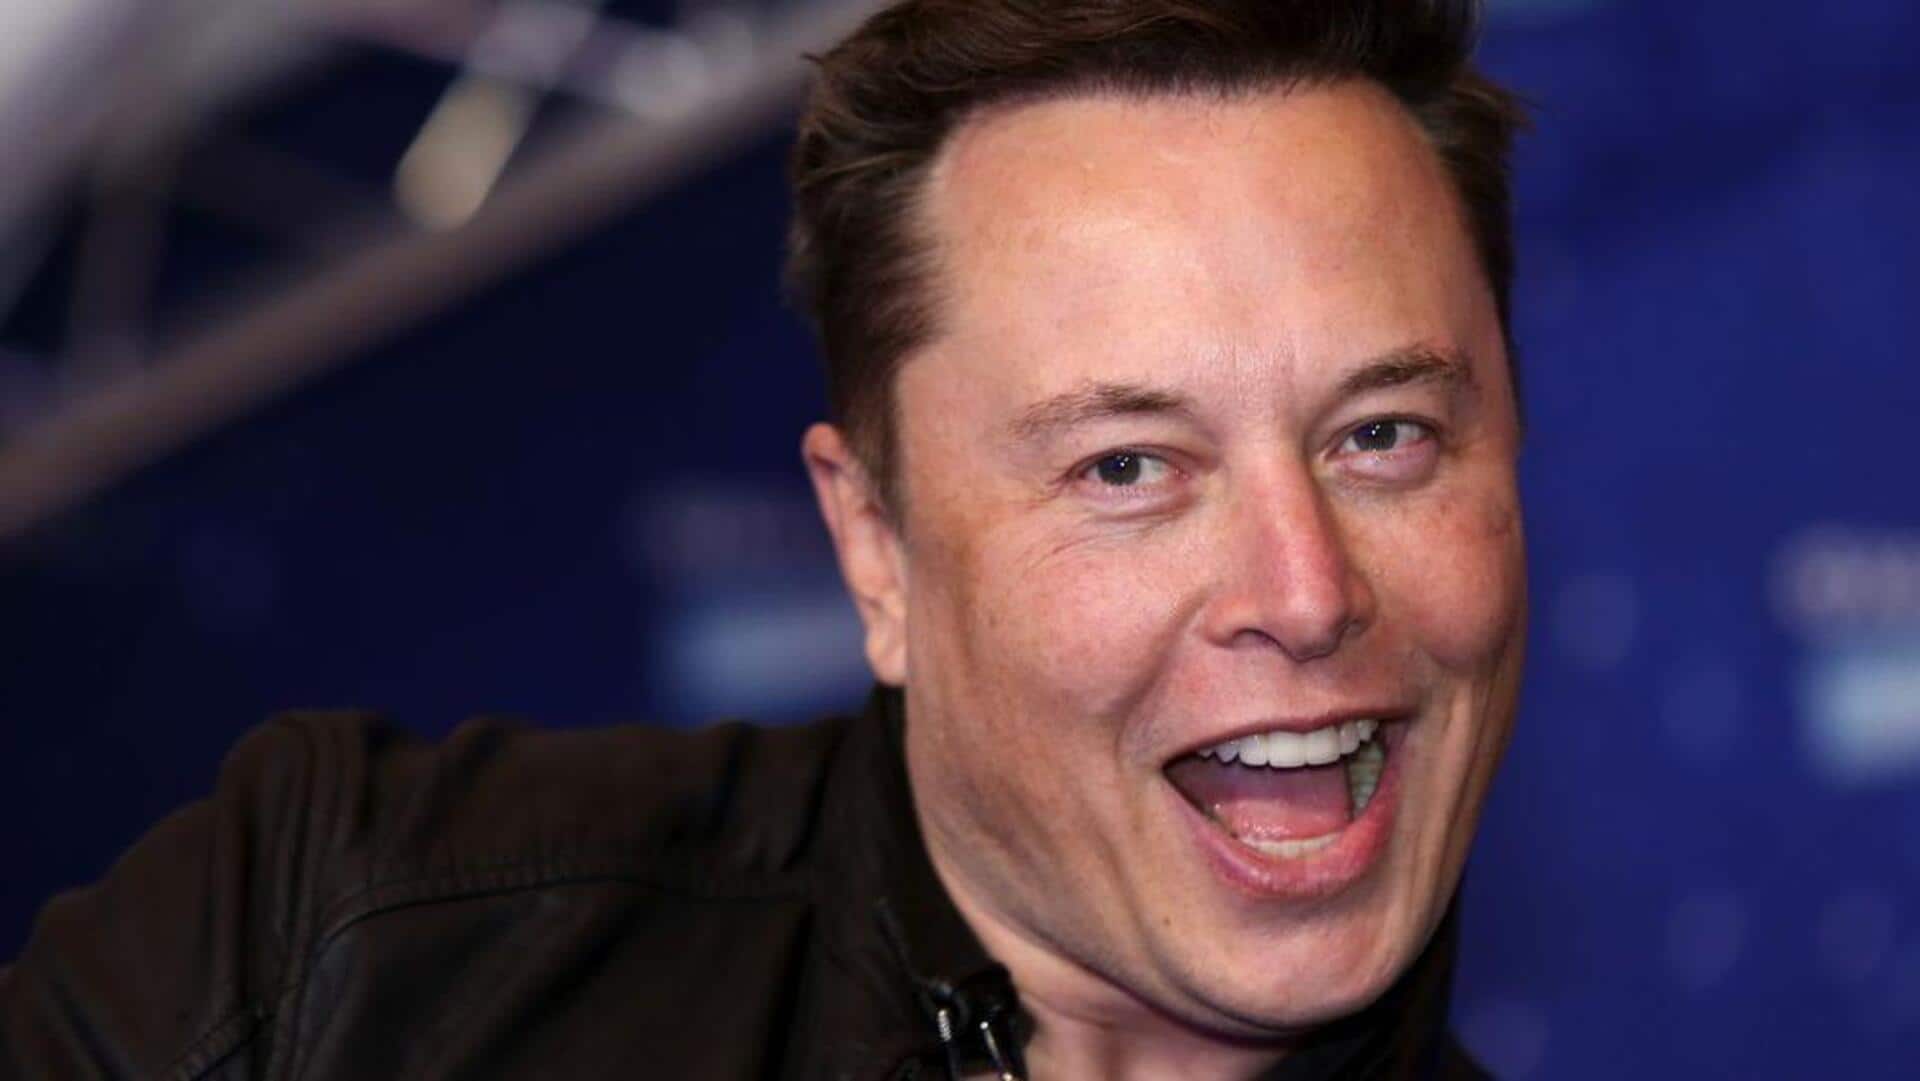 'Chief Twit' Elon Musk is now 'Chief Troll Officer'